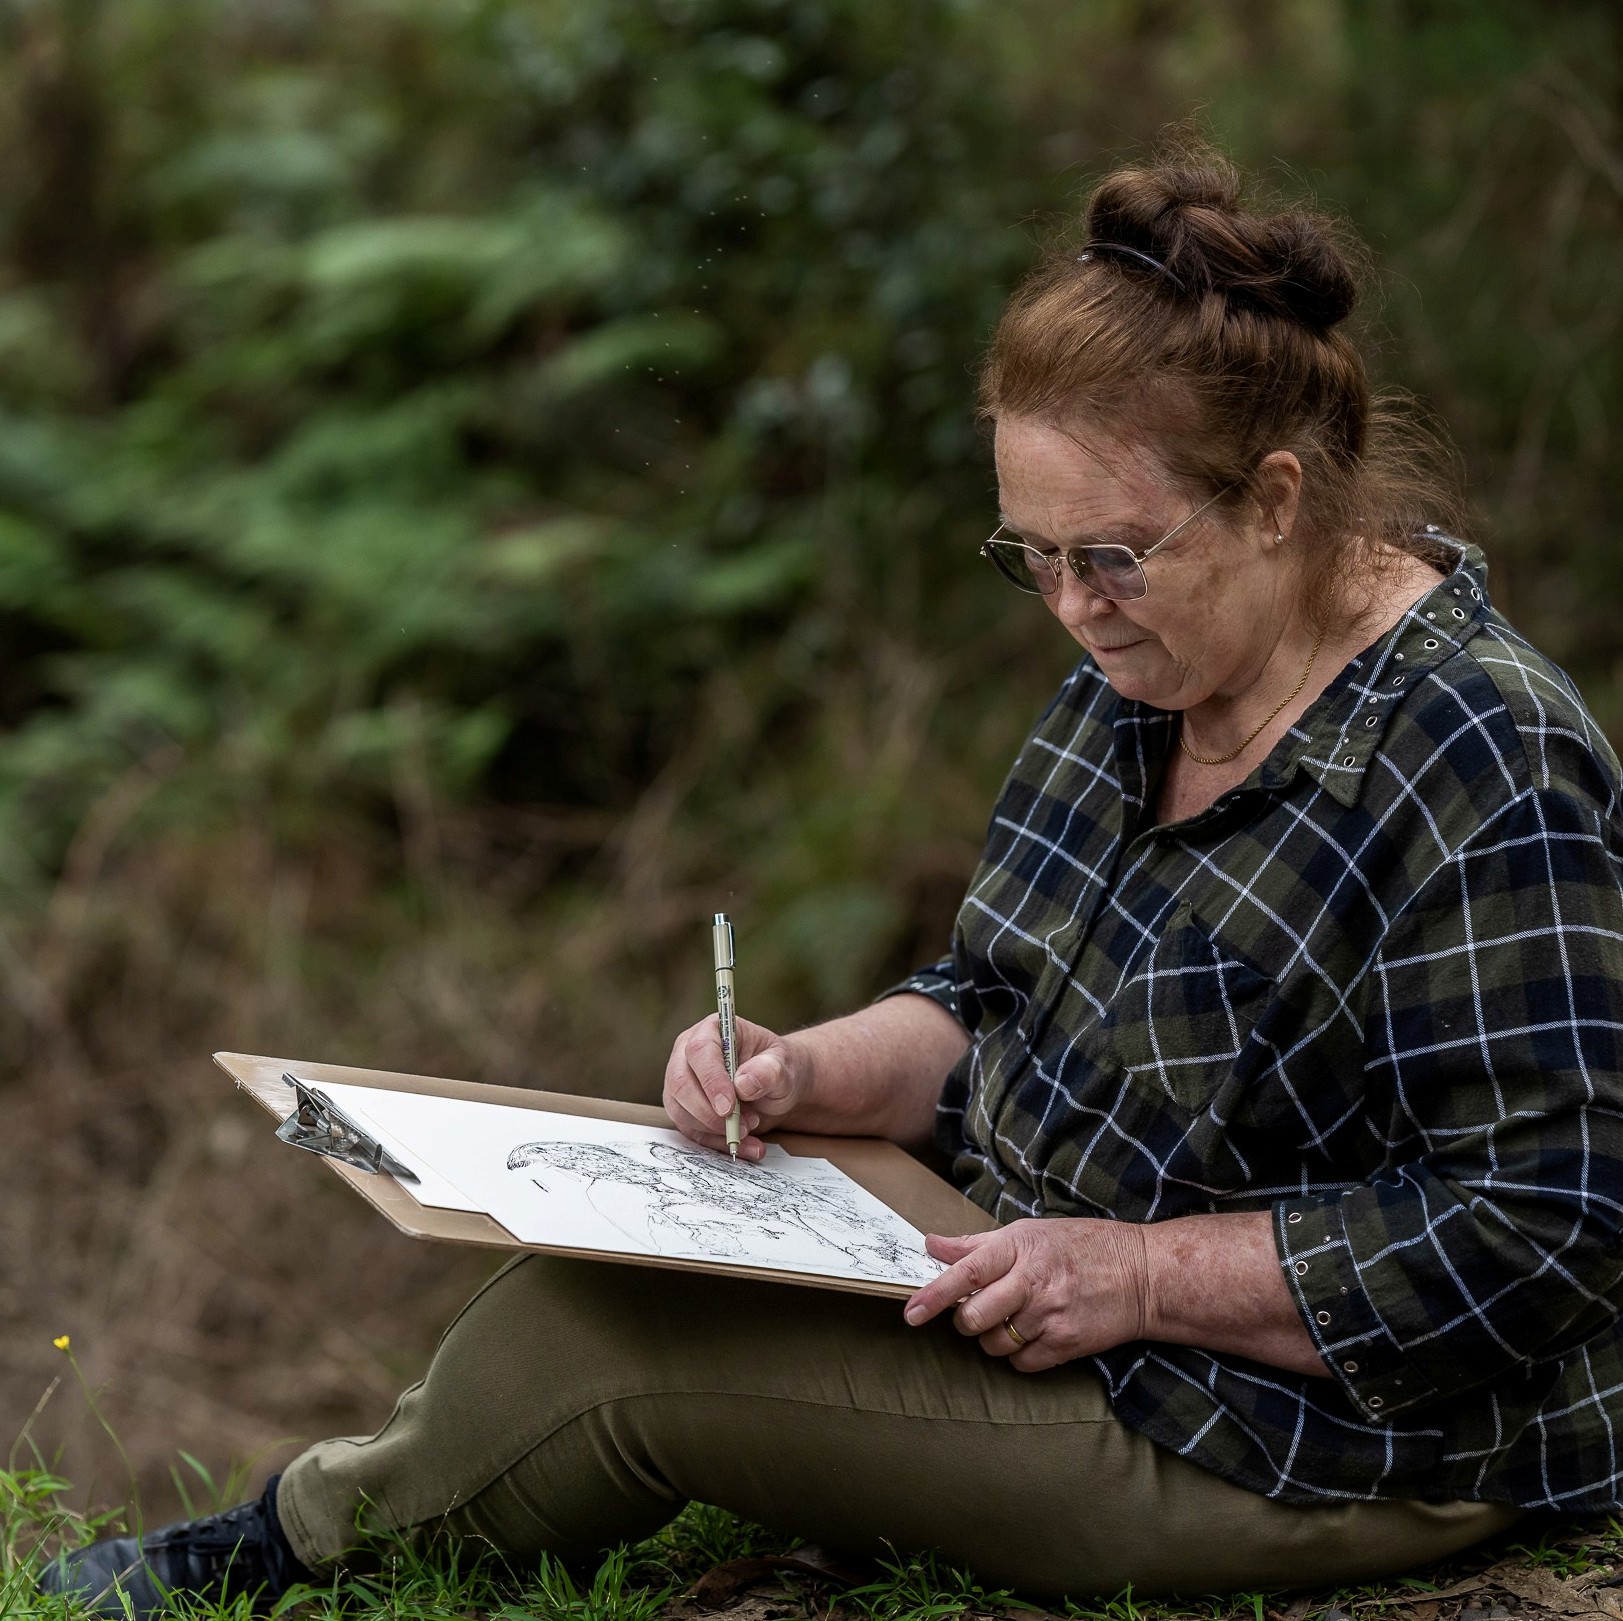 Photograph of Cardinia Shire artist, Jenni Ivins, sitting outdoors sketching on a large sheet of paper.